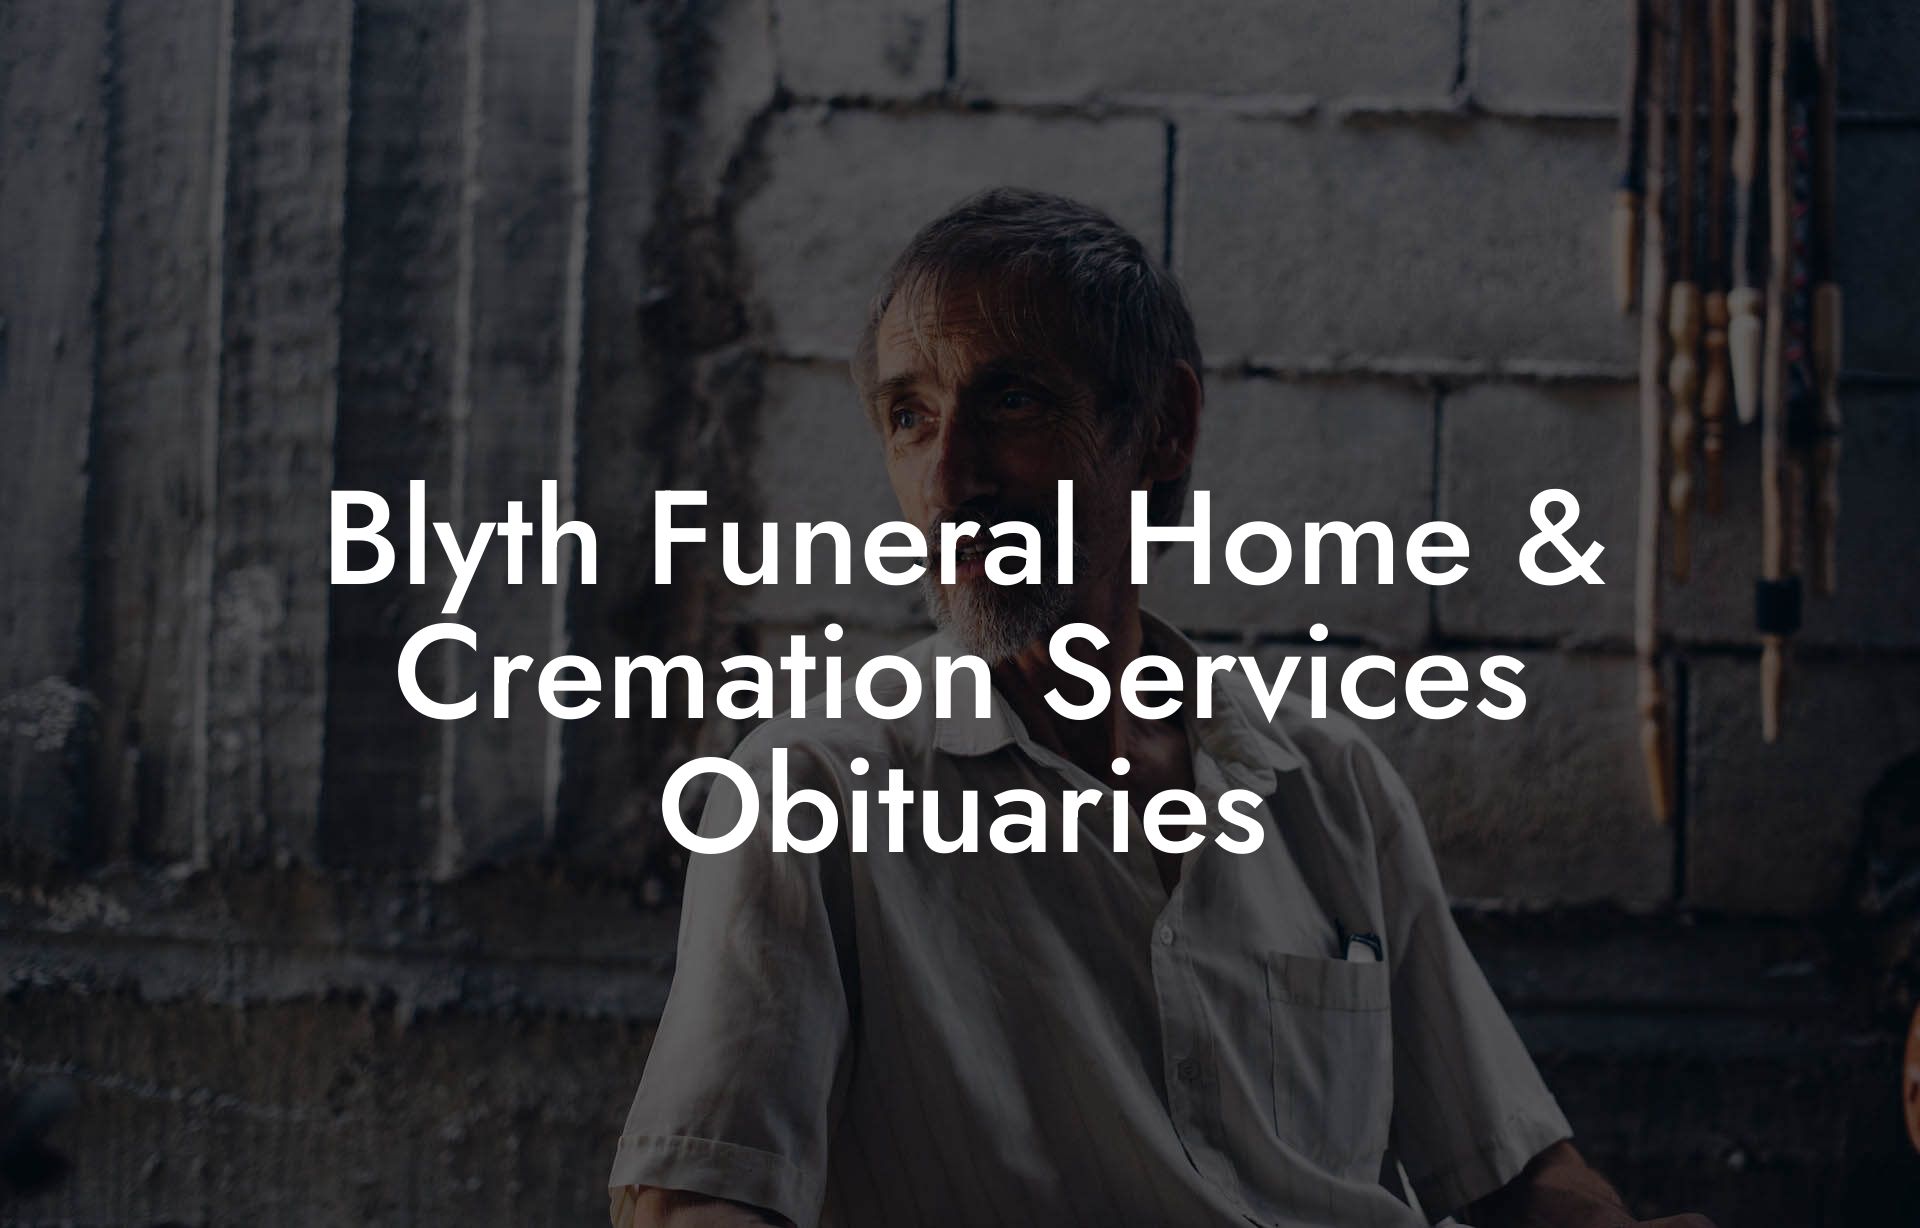 Blyth Funeral Home & Cremation Services Obituaries